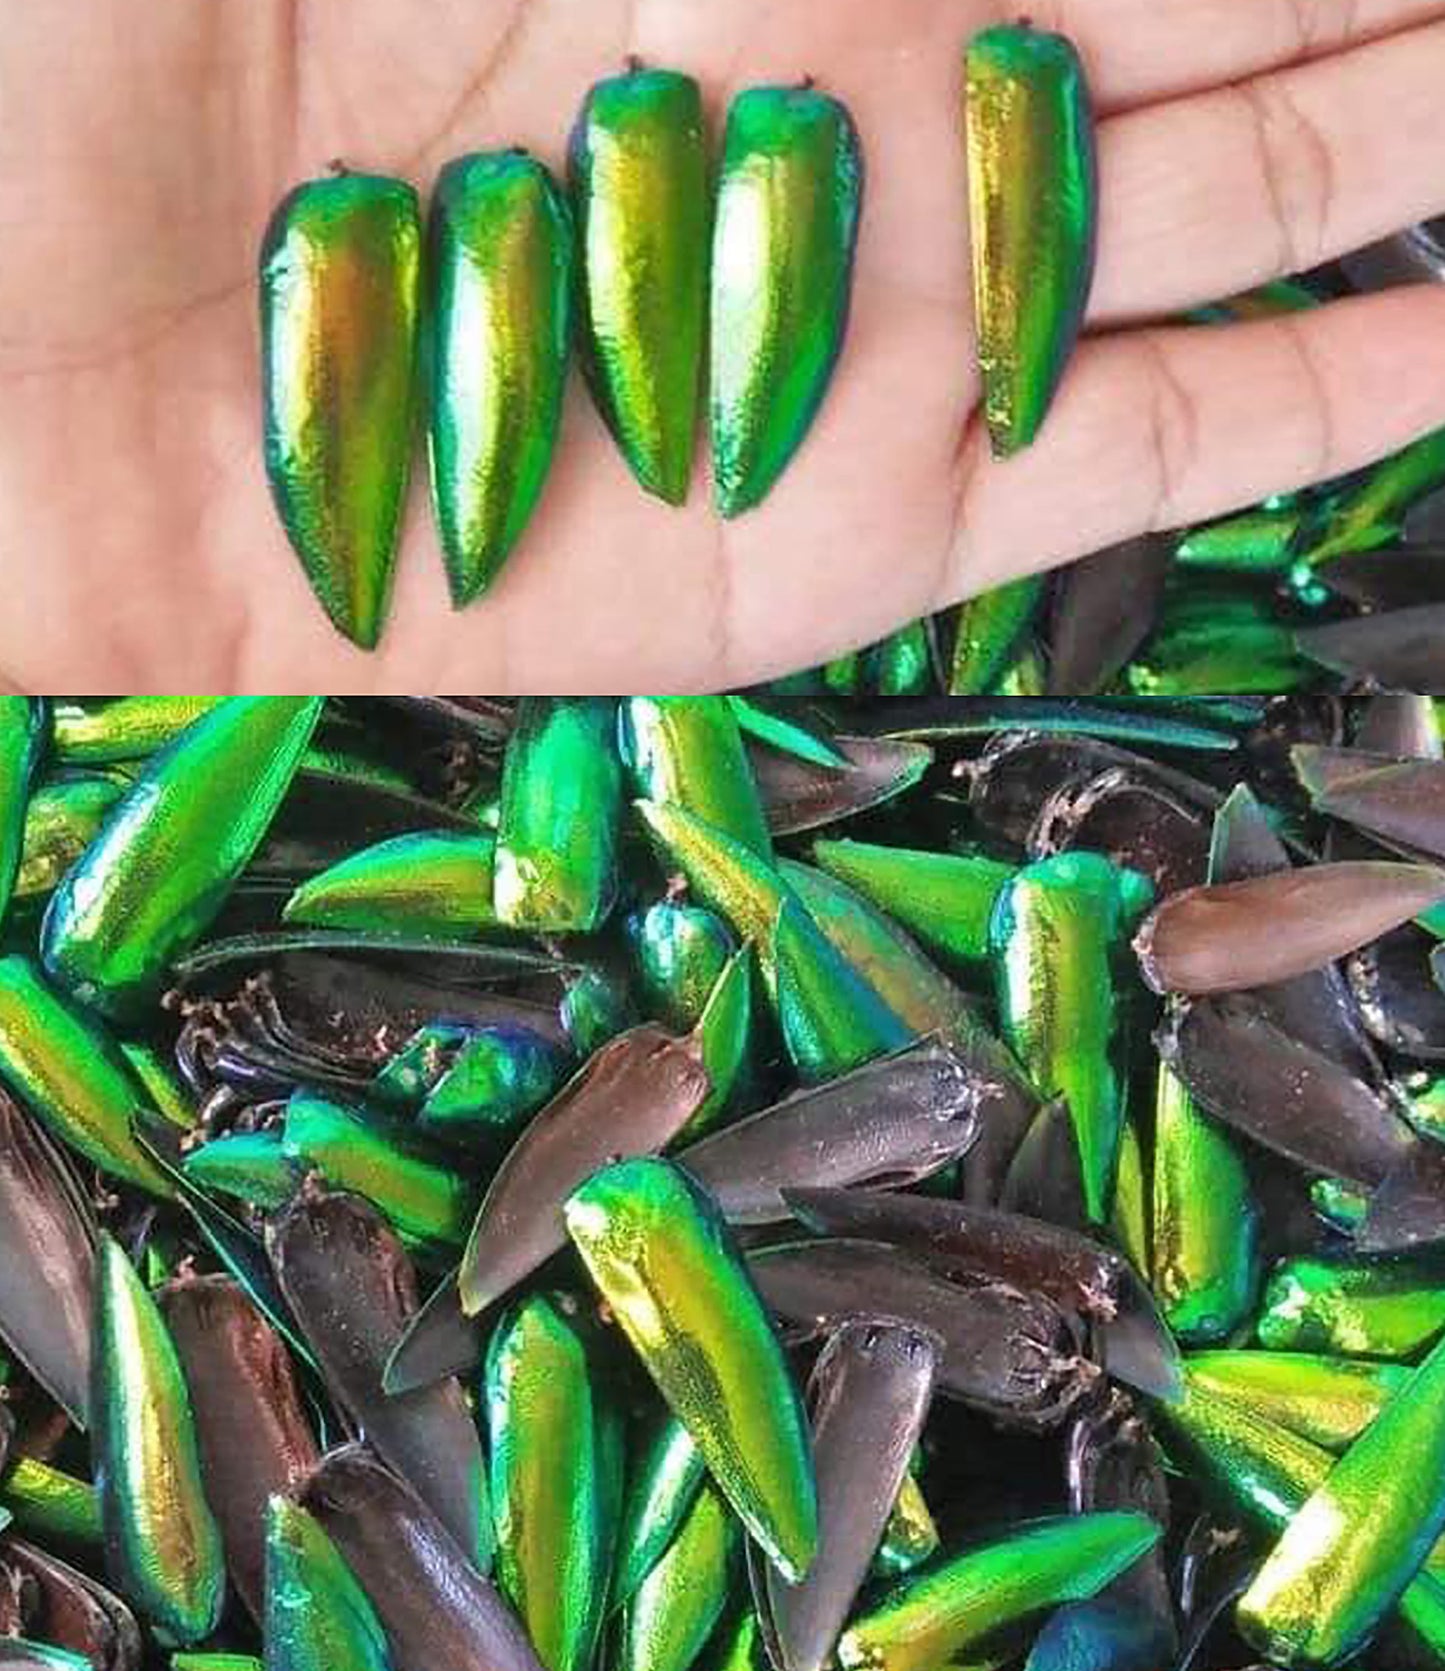 Jewel Beetle Wings UNDRILLED NO-HOLE 100 Pcs Natural Wings - YELLOWISH Green